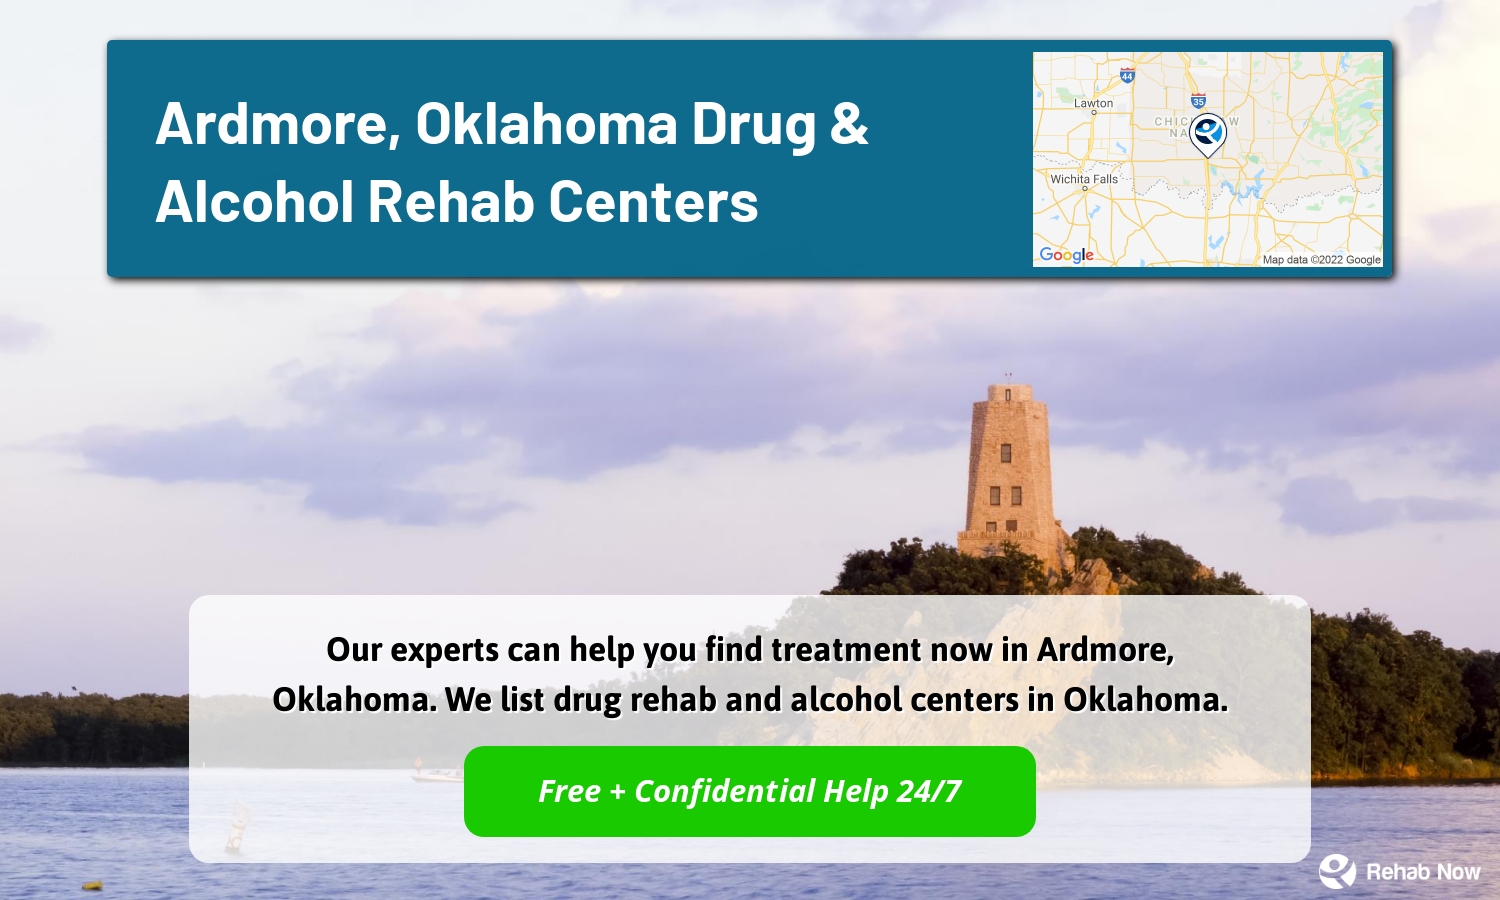 Our experts can help you find treatment now in Ardmore, Oklahoma. We list drug rehab and alcohol centers in Oklahoma.